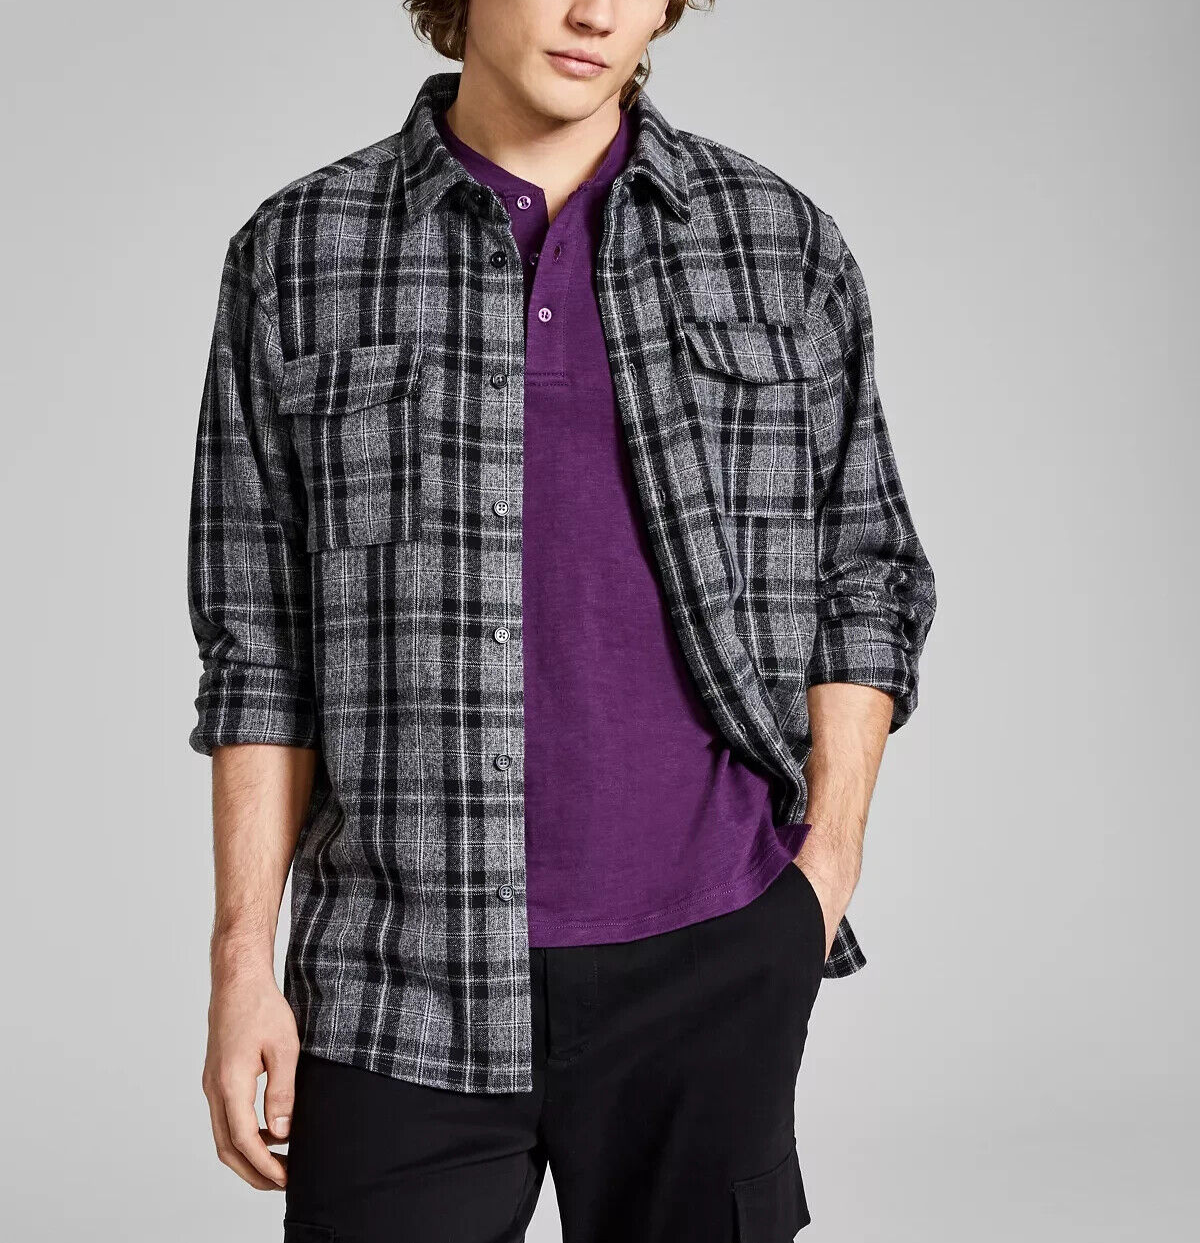 And Now This Men s Plaid Overshirt MSRP $45 Size M # 5C 2327 NEW